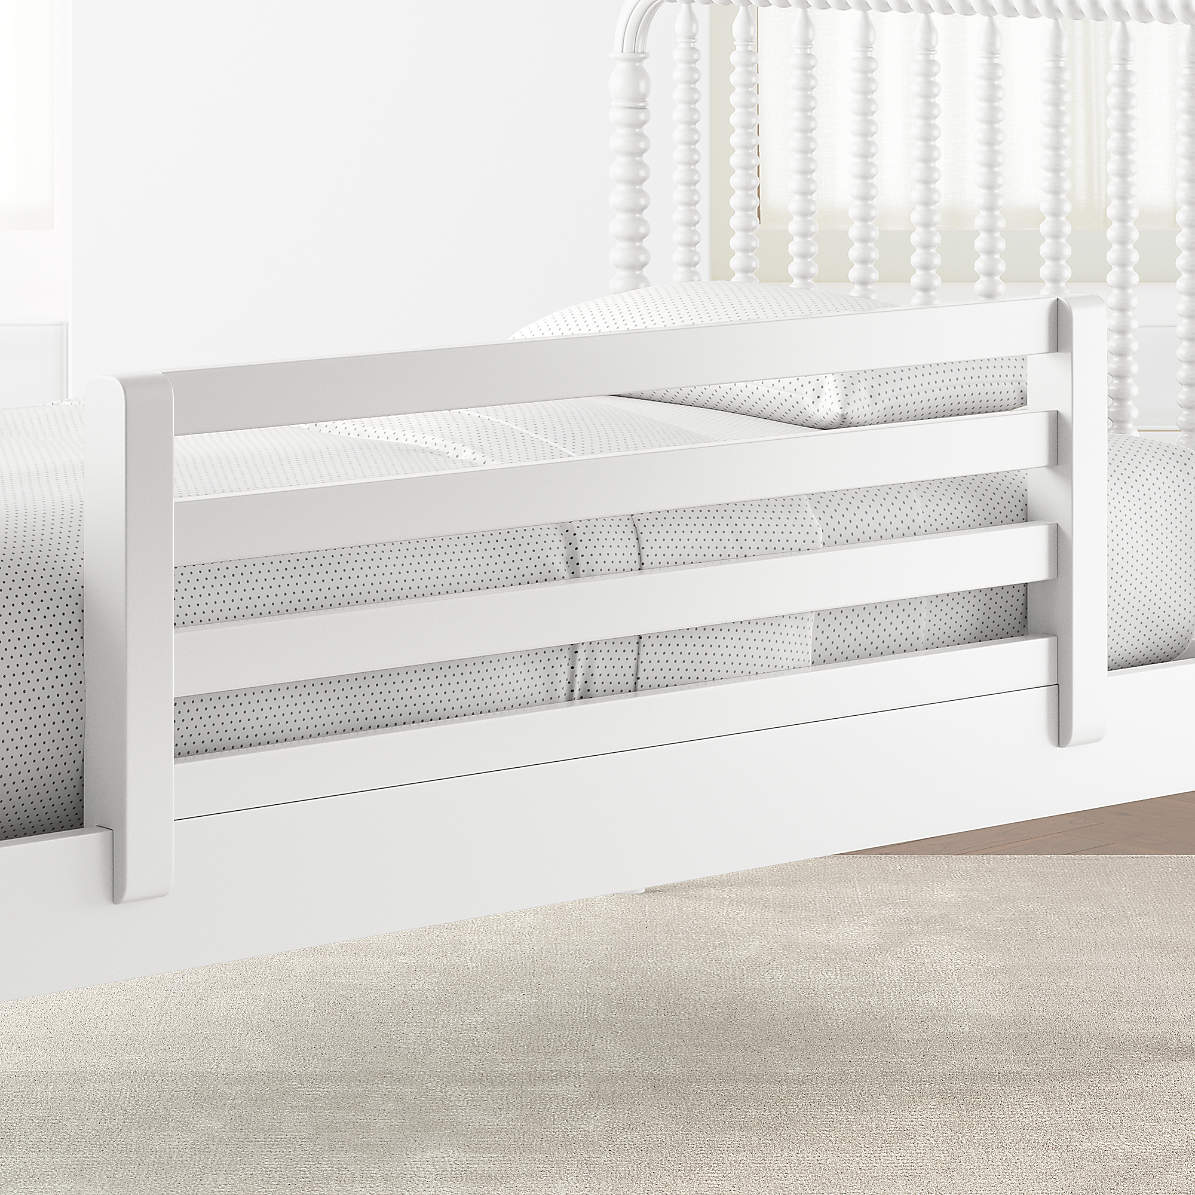 Kids White Bed Rail Reviews Crate, Jenny Lind Bunk Bed